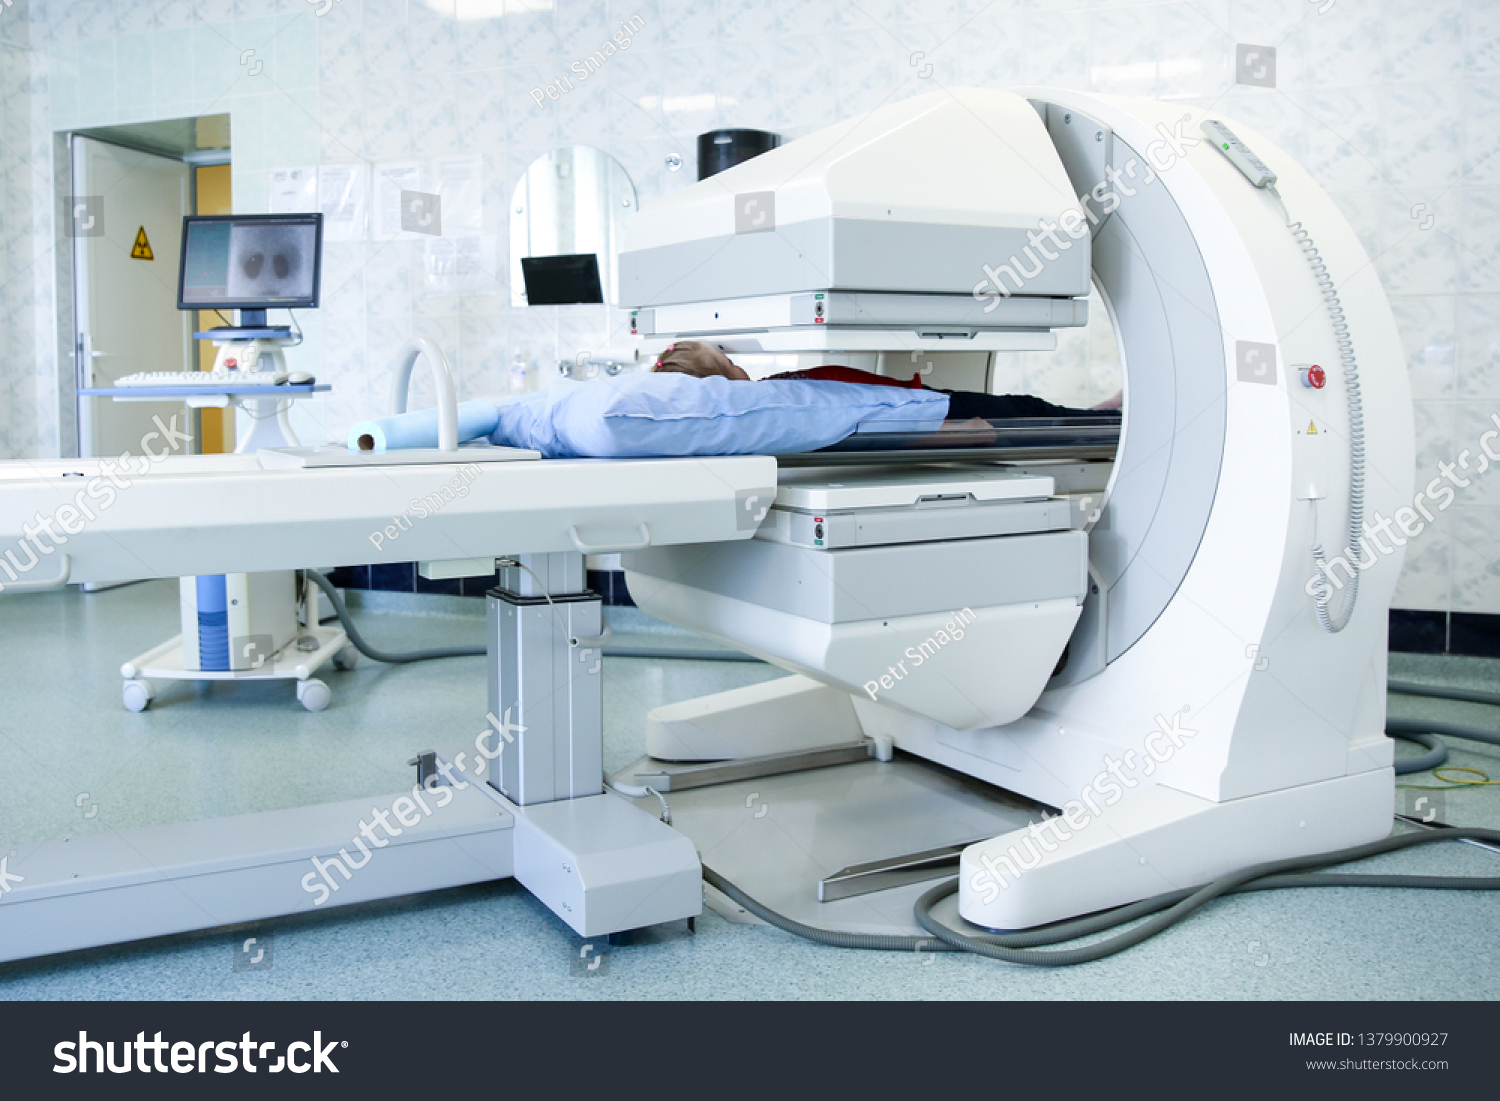 Gamma camera in the parlor of the clinic of nuclear medicine. Medical equipment in the hospital. Body examination equipment. The patient undergoes a medical examination. #1379900927